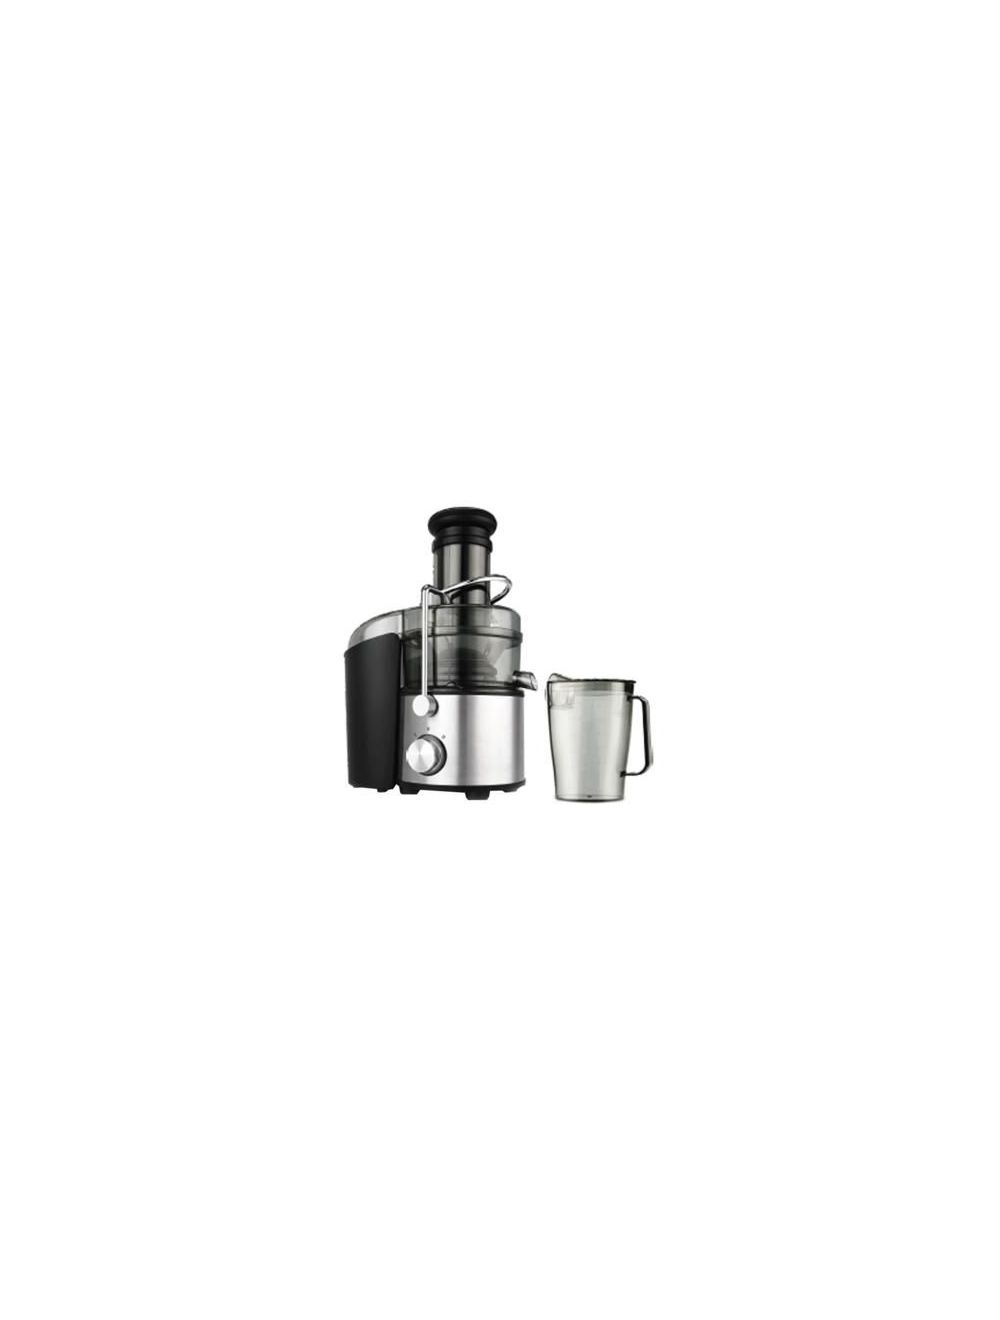 Olsenmark Juice Extractor with Stainless Steel Housing - 75mm Feeding Tube - 2L Pulp Container & 1.1L Juice Collection Cup